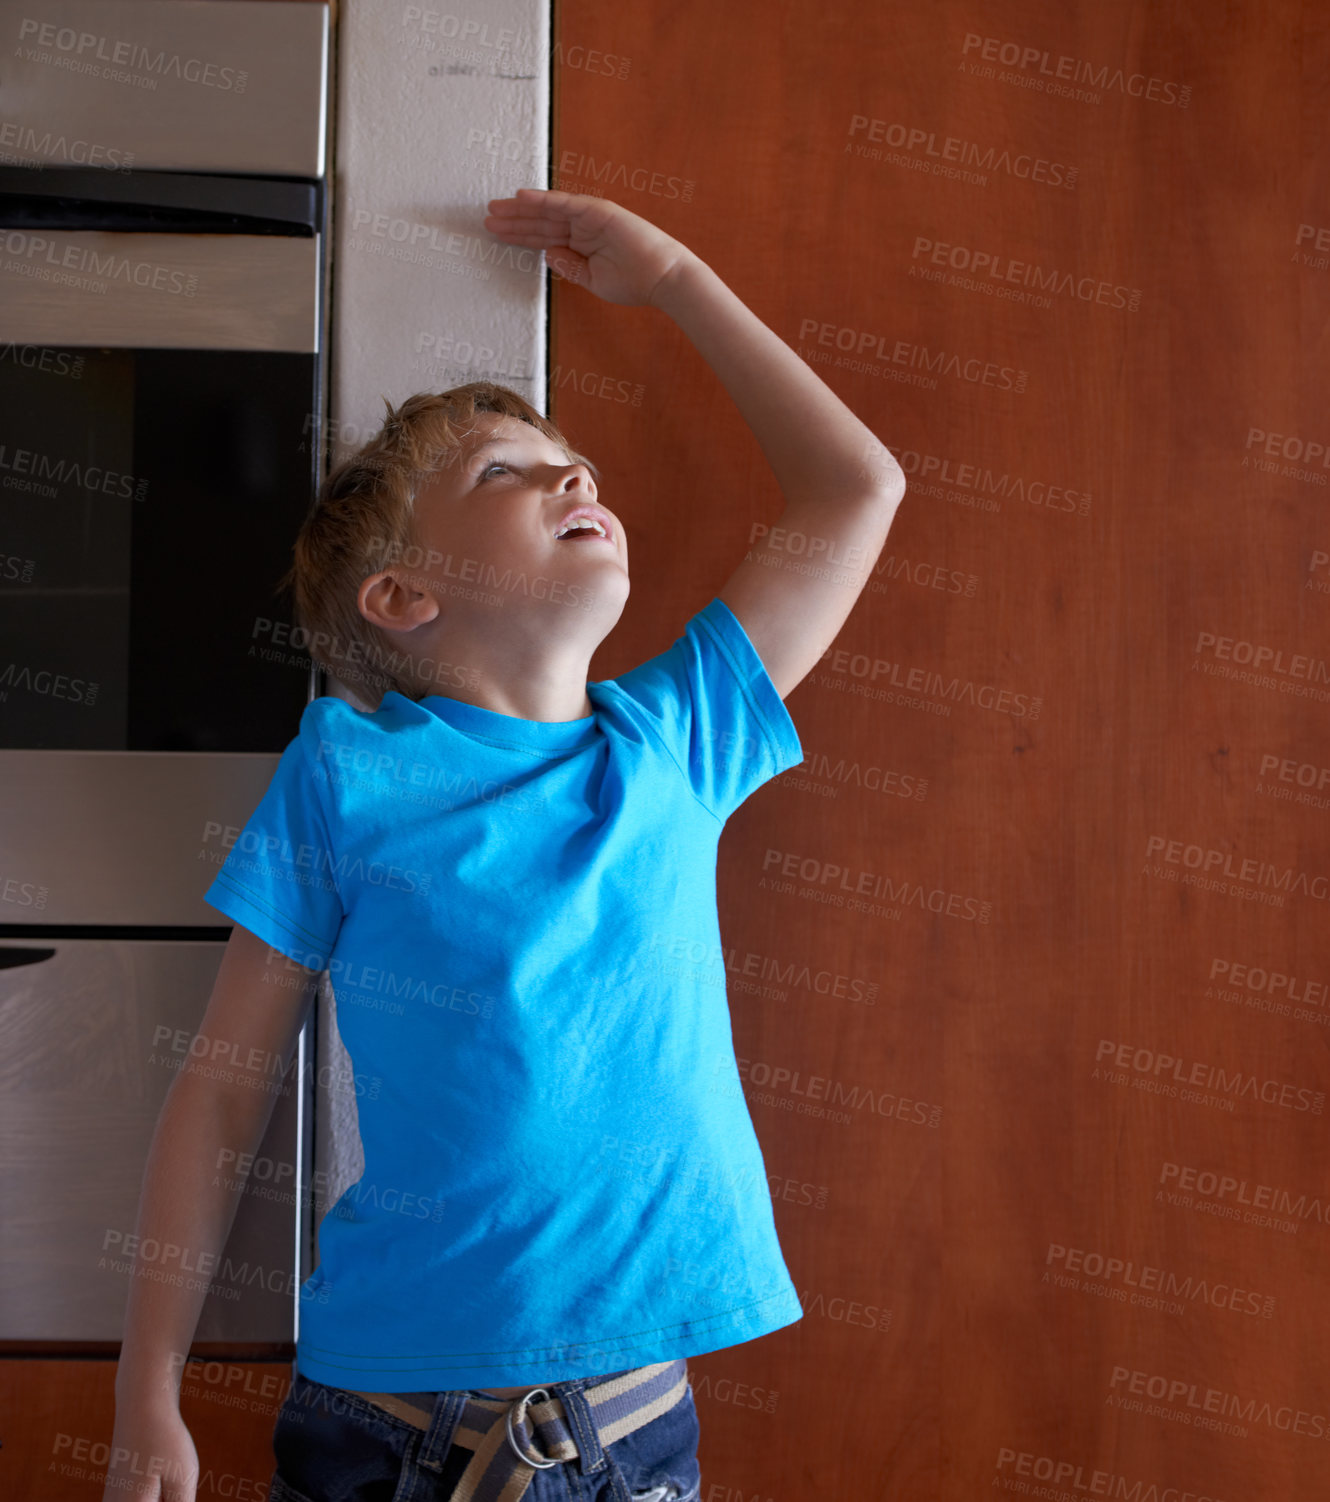 Buy stock photo A young boy measuring his height at home